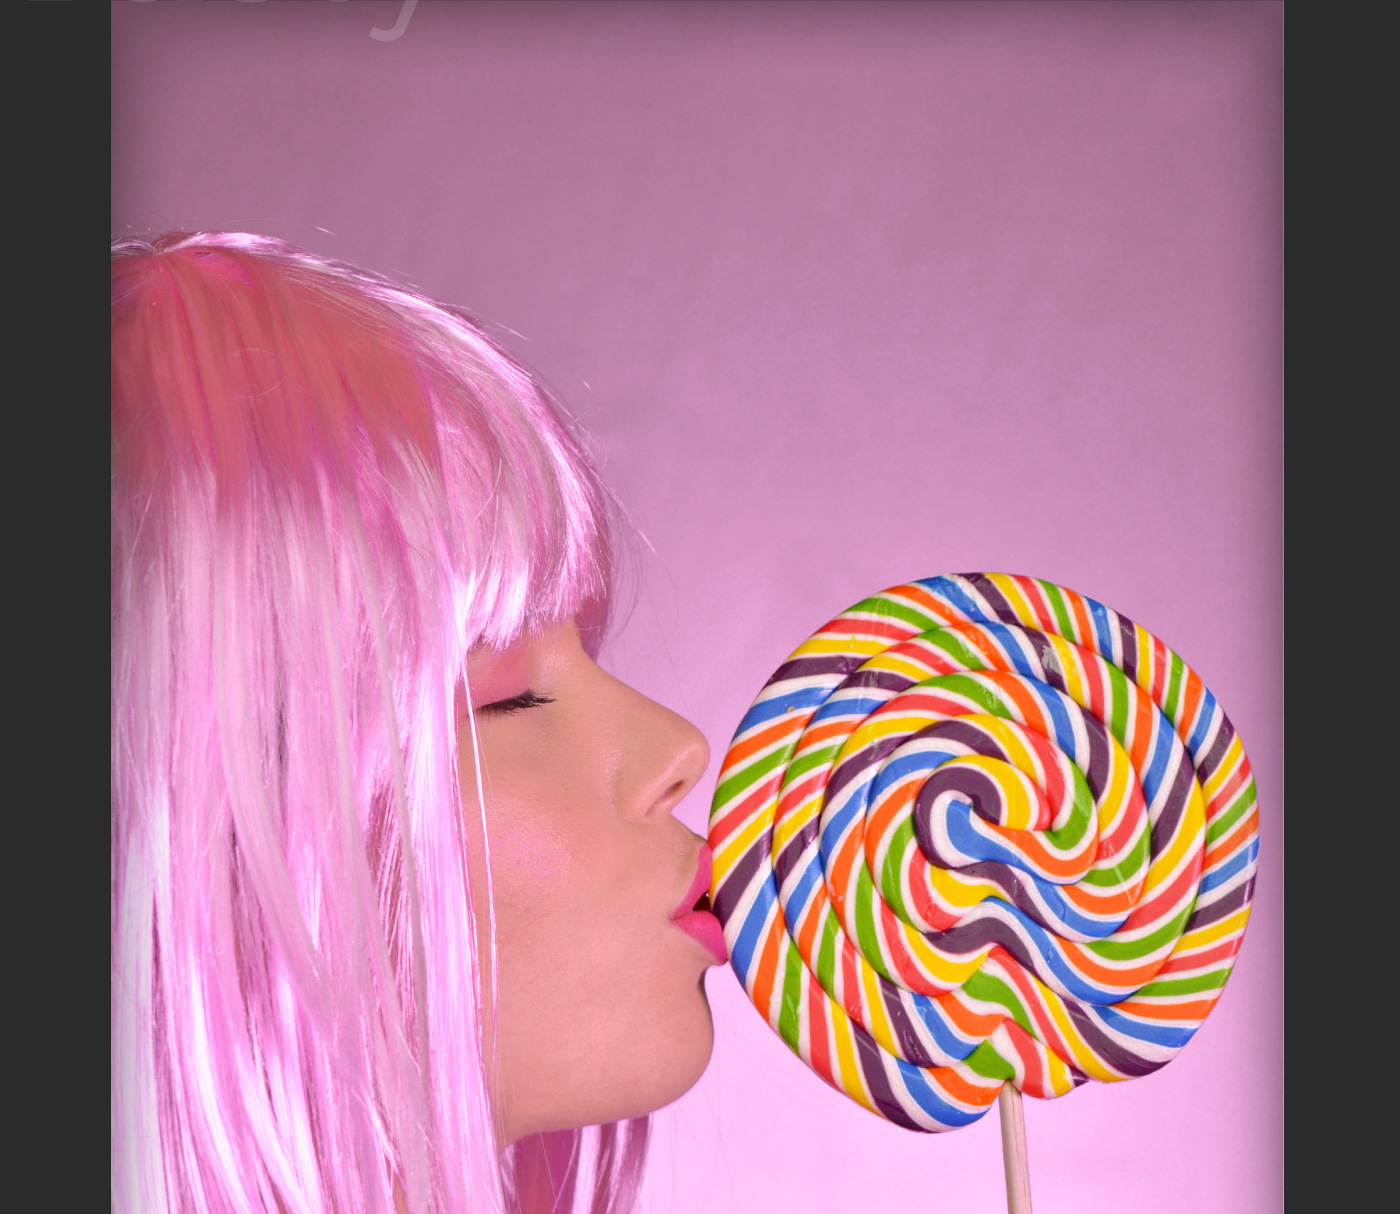 Photography  product art direction  Candy sweet girl products